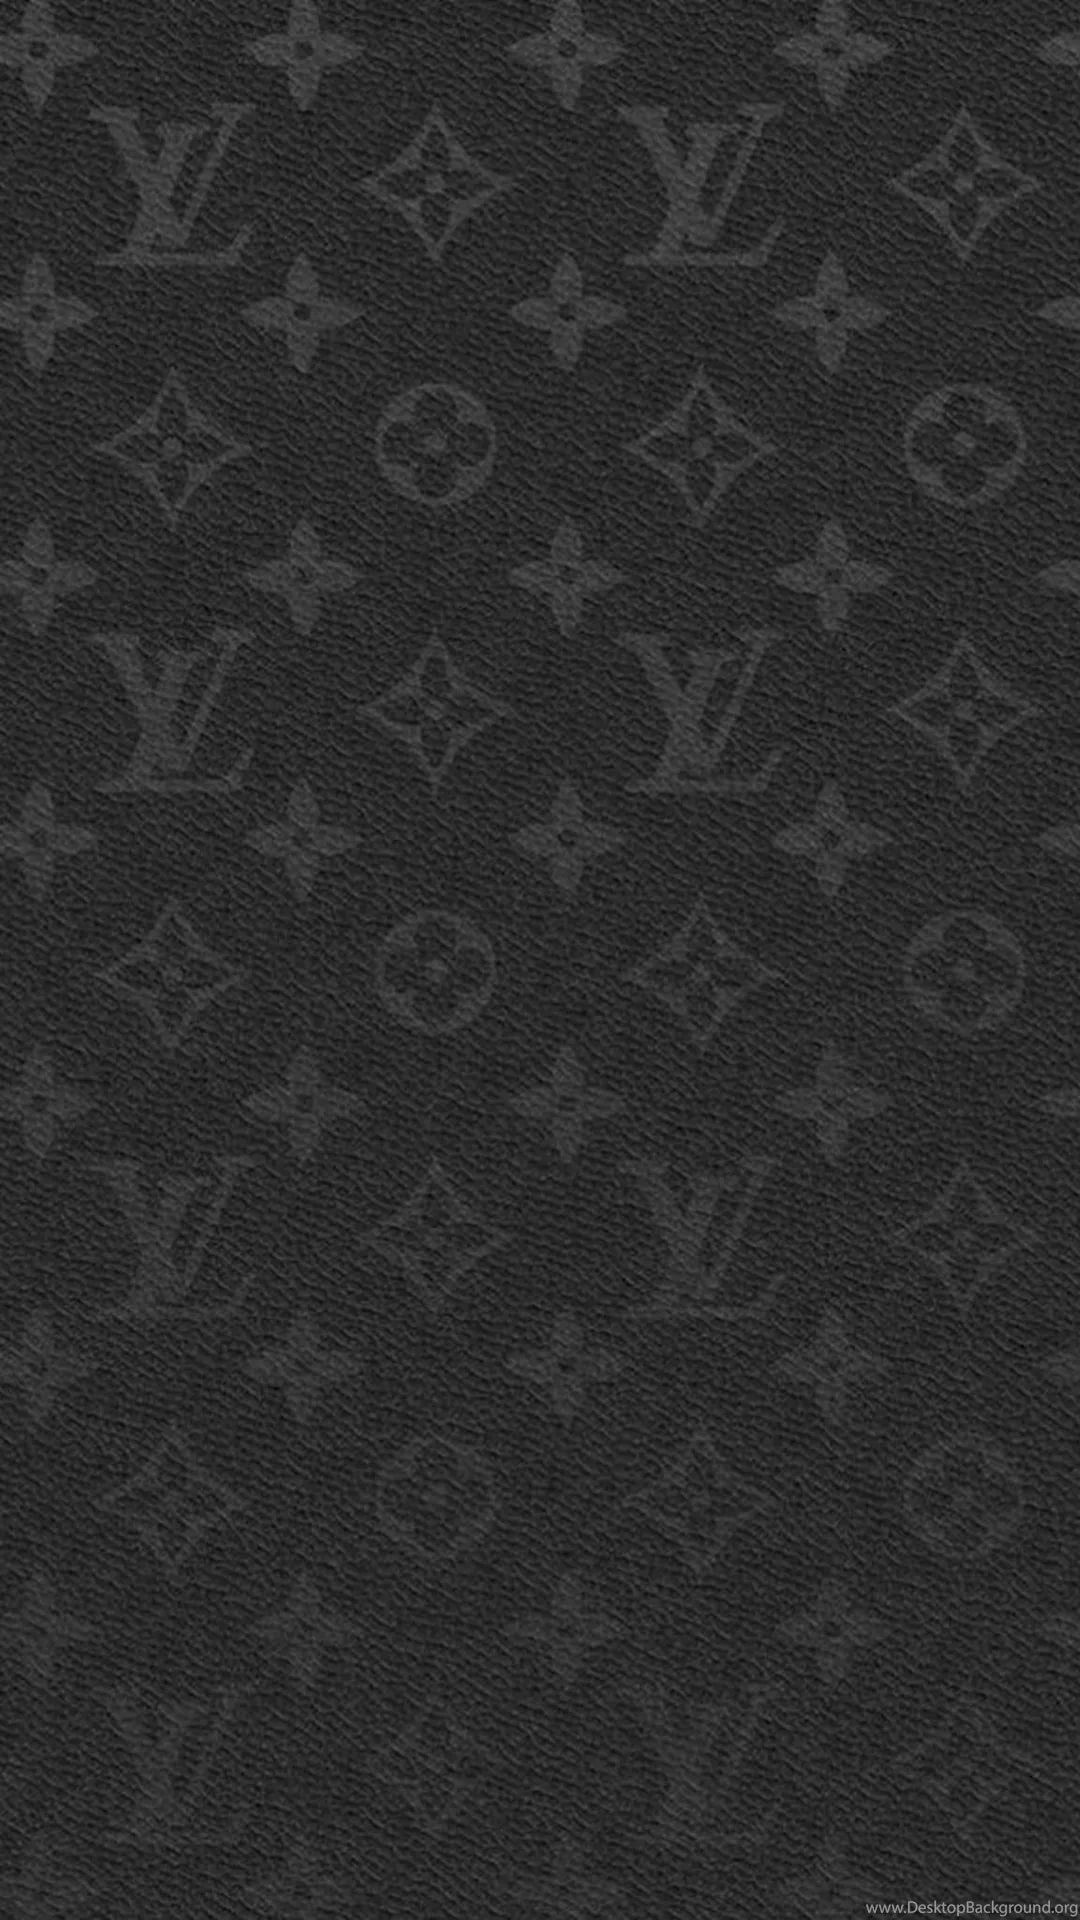 Chanel Background iPhone 5 wallpaper